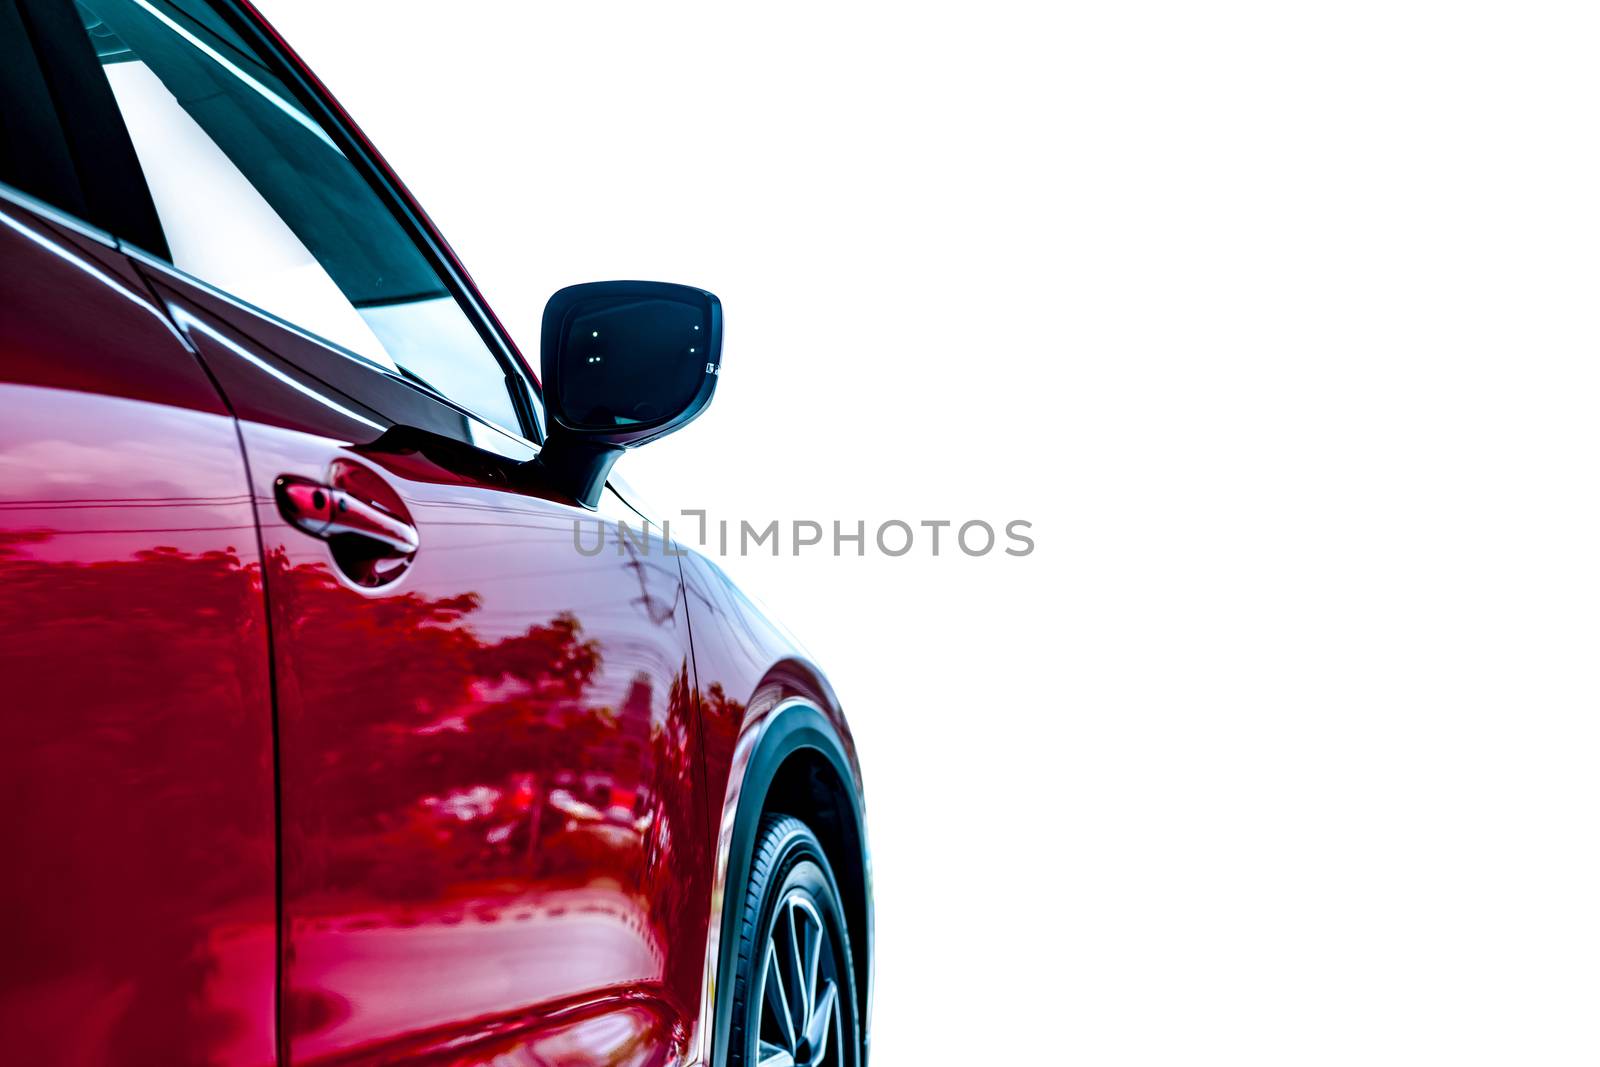 Luxury car isolated on white background. Auto leasing business. Car dealership concept. Side view of red shiny car with copy space. Automotive industry. Auto glass coating and shinning business. EV.